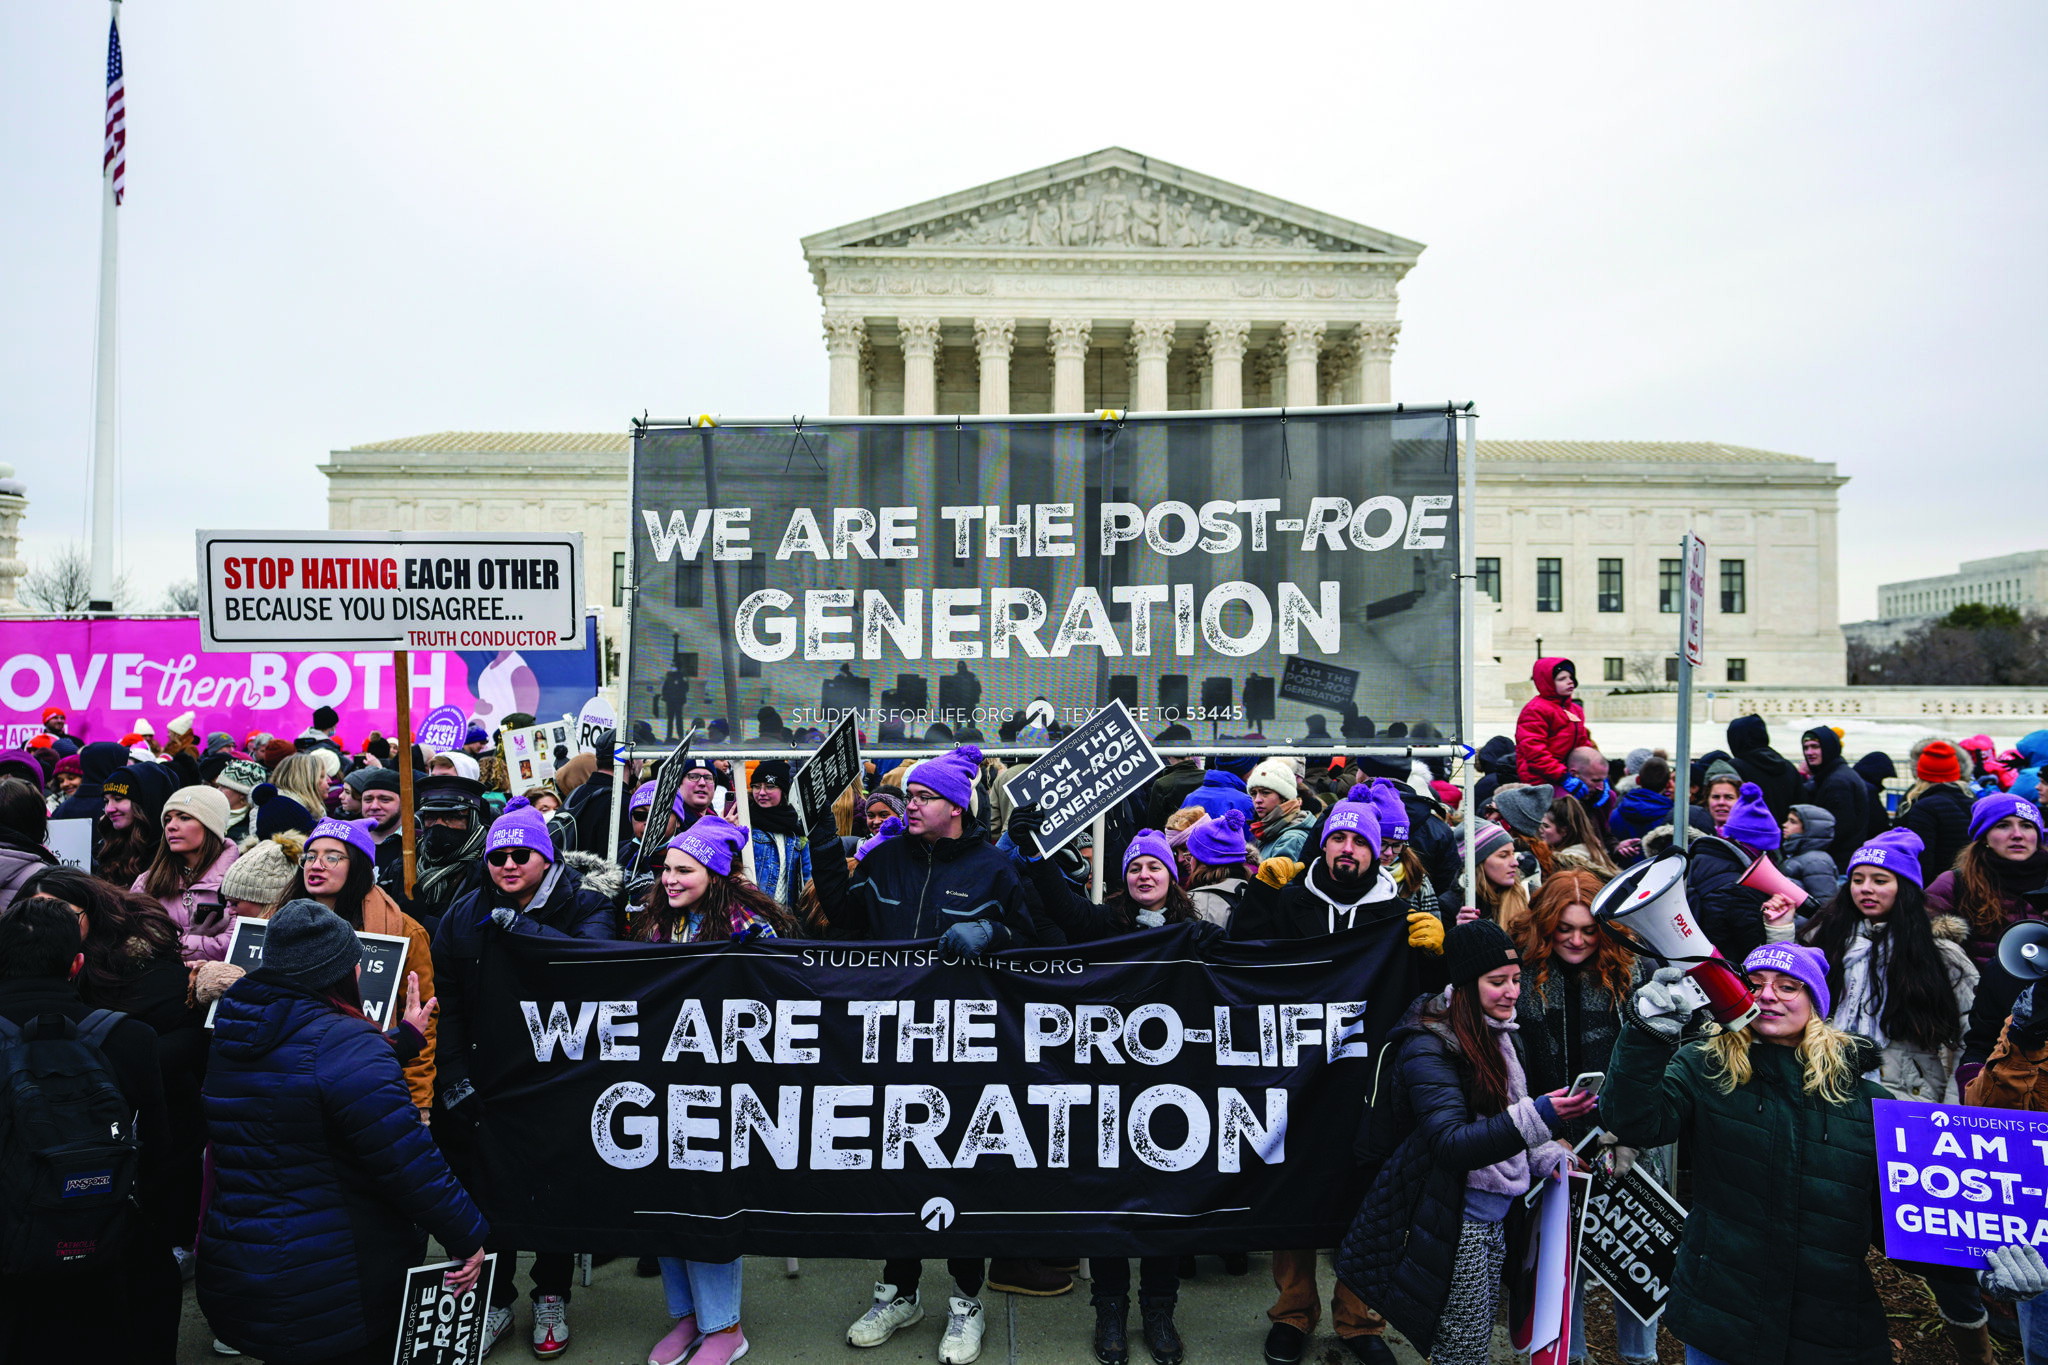 WASHINGTON, DC - JANUARY 21: Anti-abortion activists rally outside the U.S. Supreme Court during the 49th annual March for Life rally on January 21, 2022 in Washington, DC. The rally draws activists from around the country who are calling on the U.S. Supreme Court to overturn the Roe v. Wade decision that legalized abortion nationwide. (Photo by Drew Angerer/Getty Images)